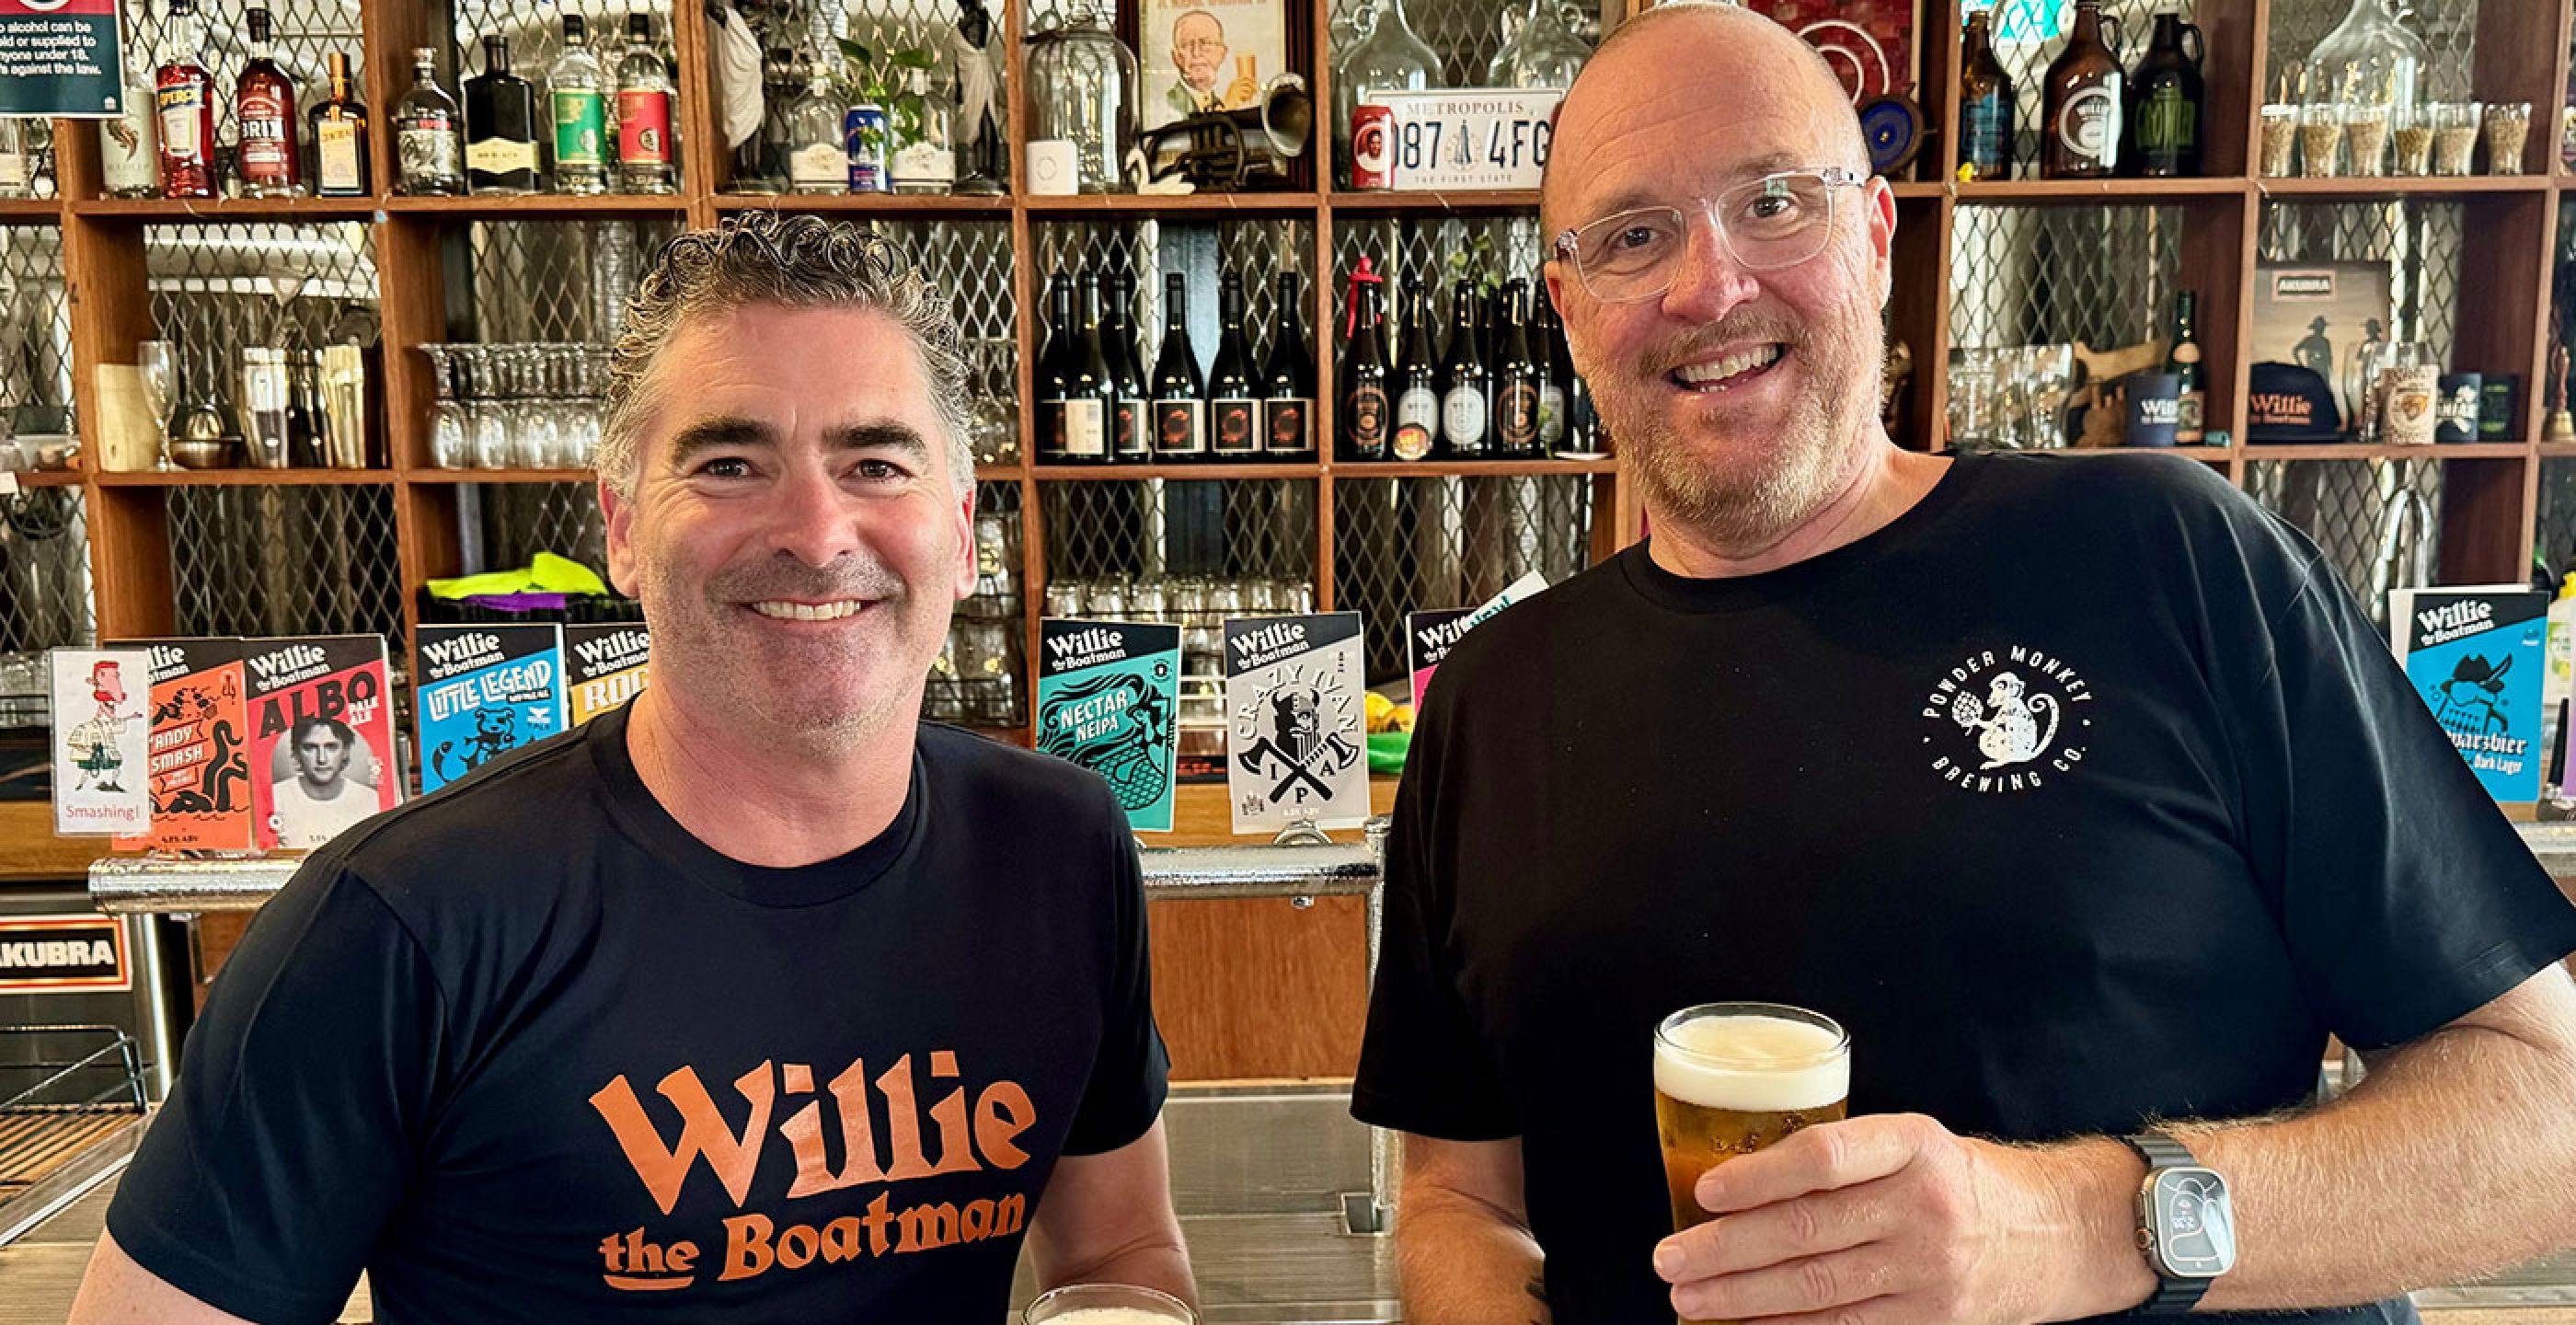 More Consolidation As Willie the Boatman Is Acquired By UK-based Powder Monkey